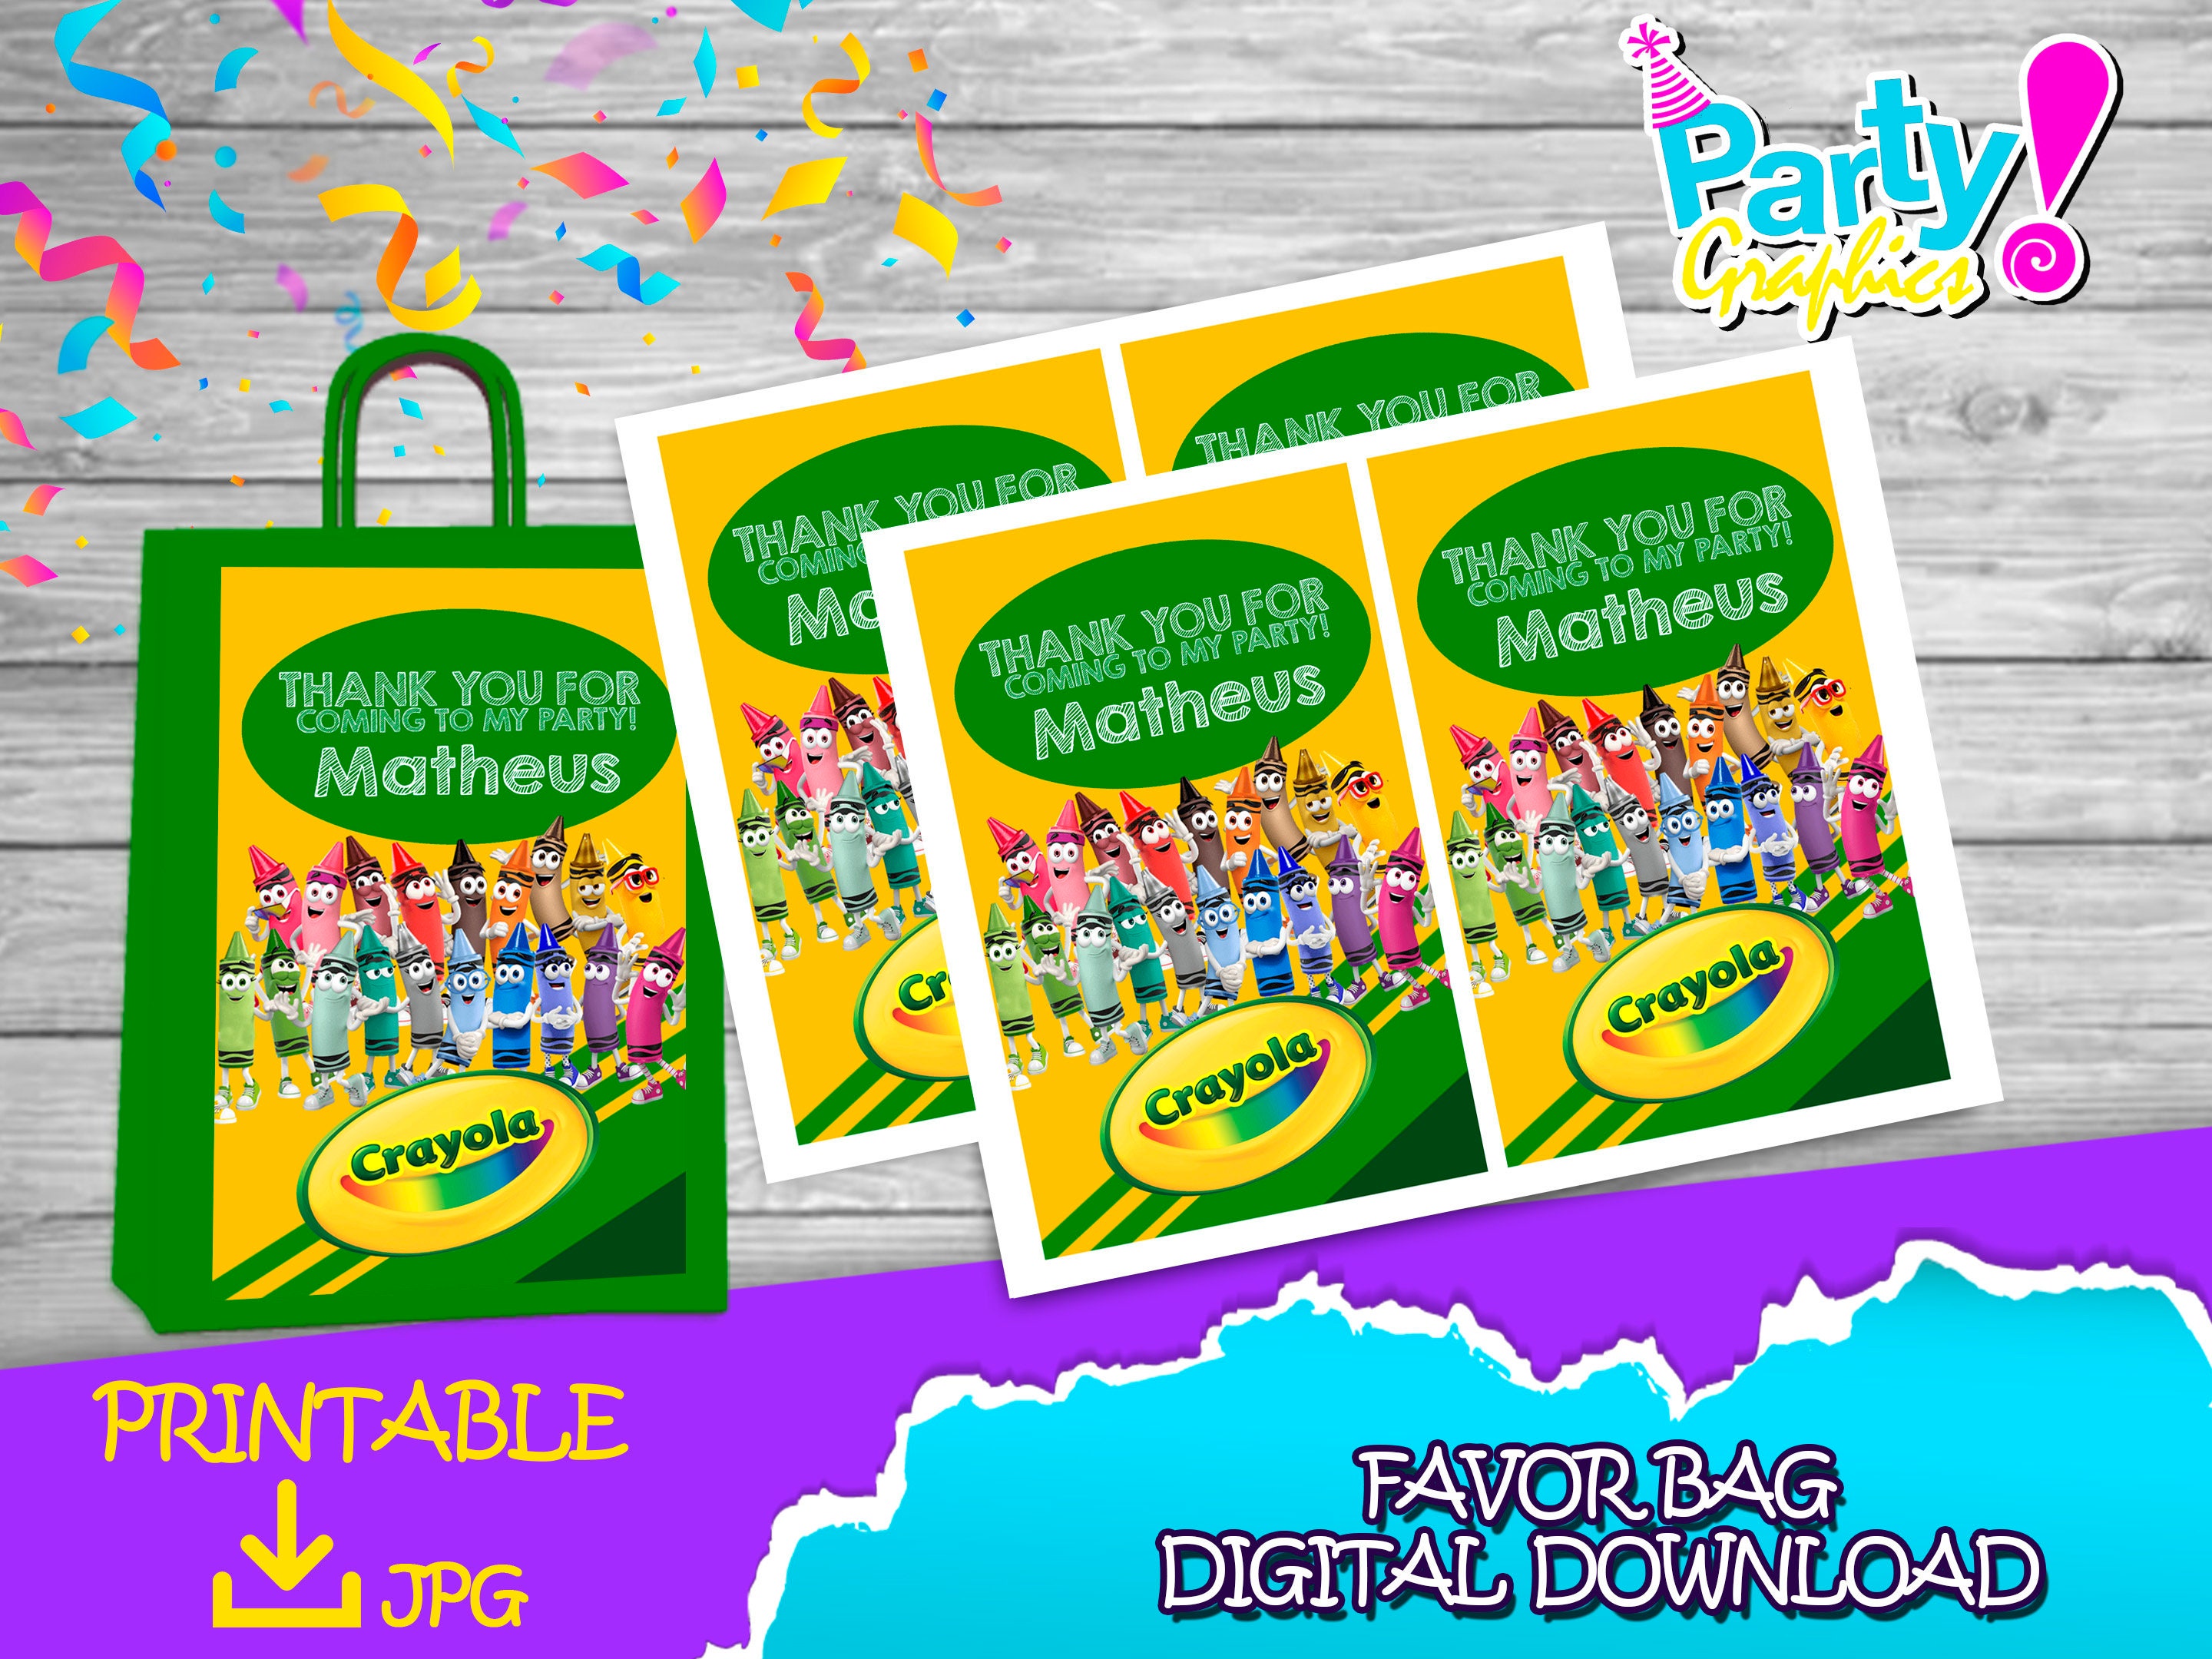 Top Crayola Party Favors Kids Will Love - Kid Bam  Crayola birthday party,  Diy birthday party favors, Kid party favors